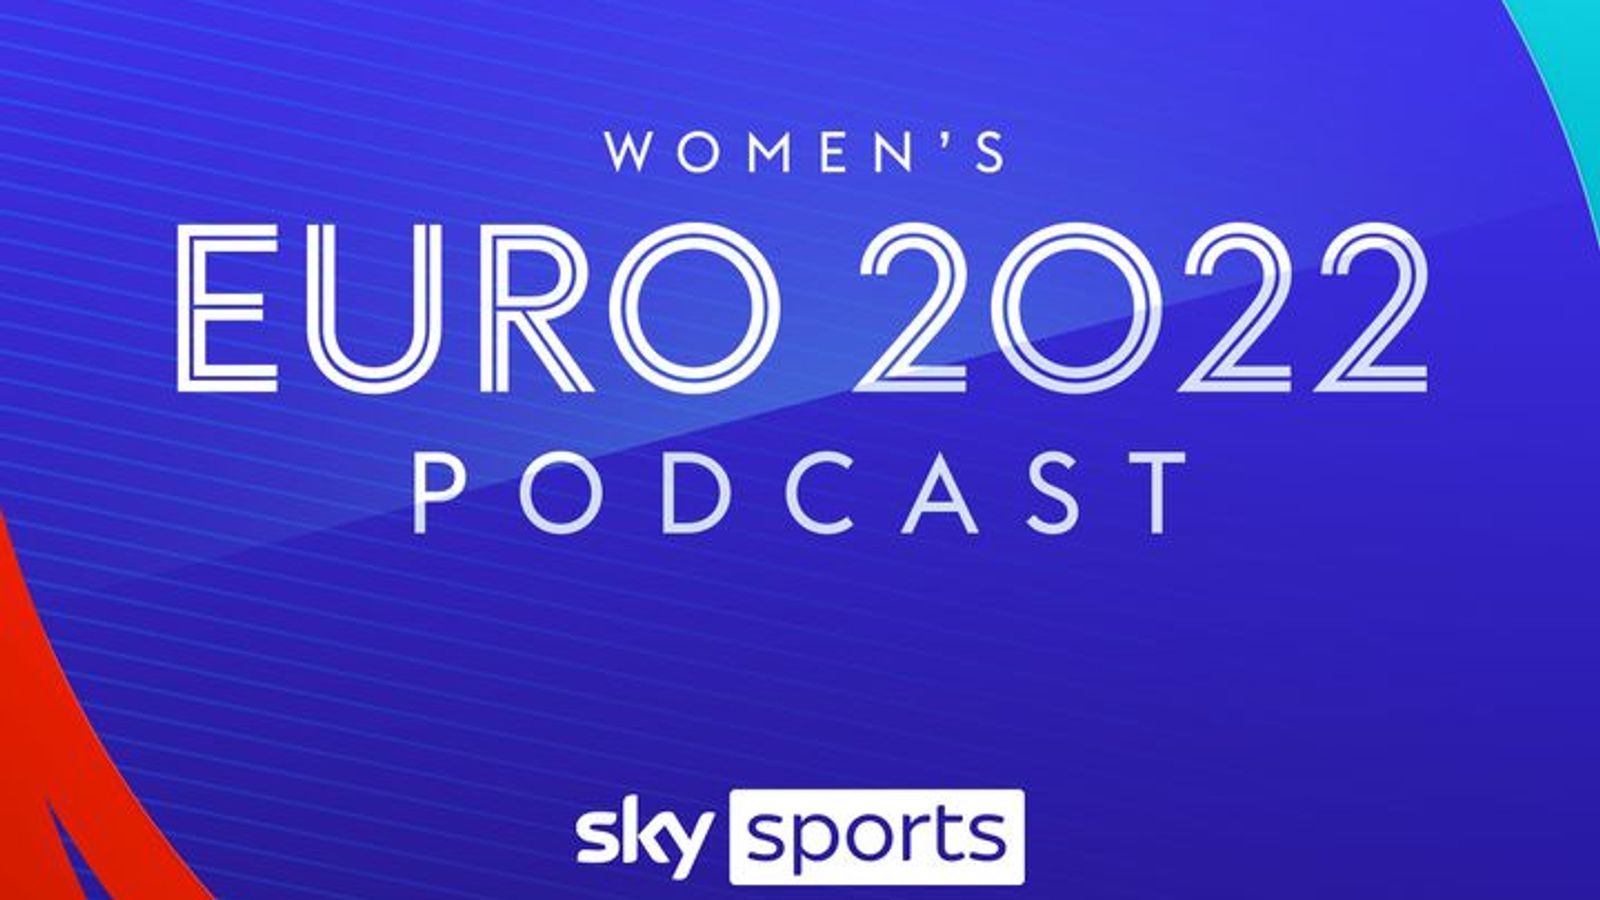 listen-and-subscribe-to-the-sky-sports-women-s-euros-podcast